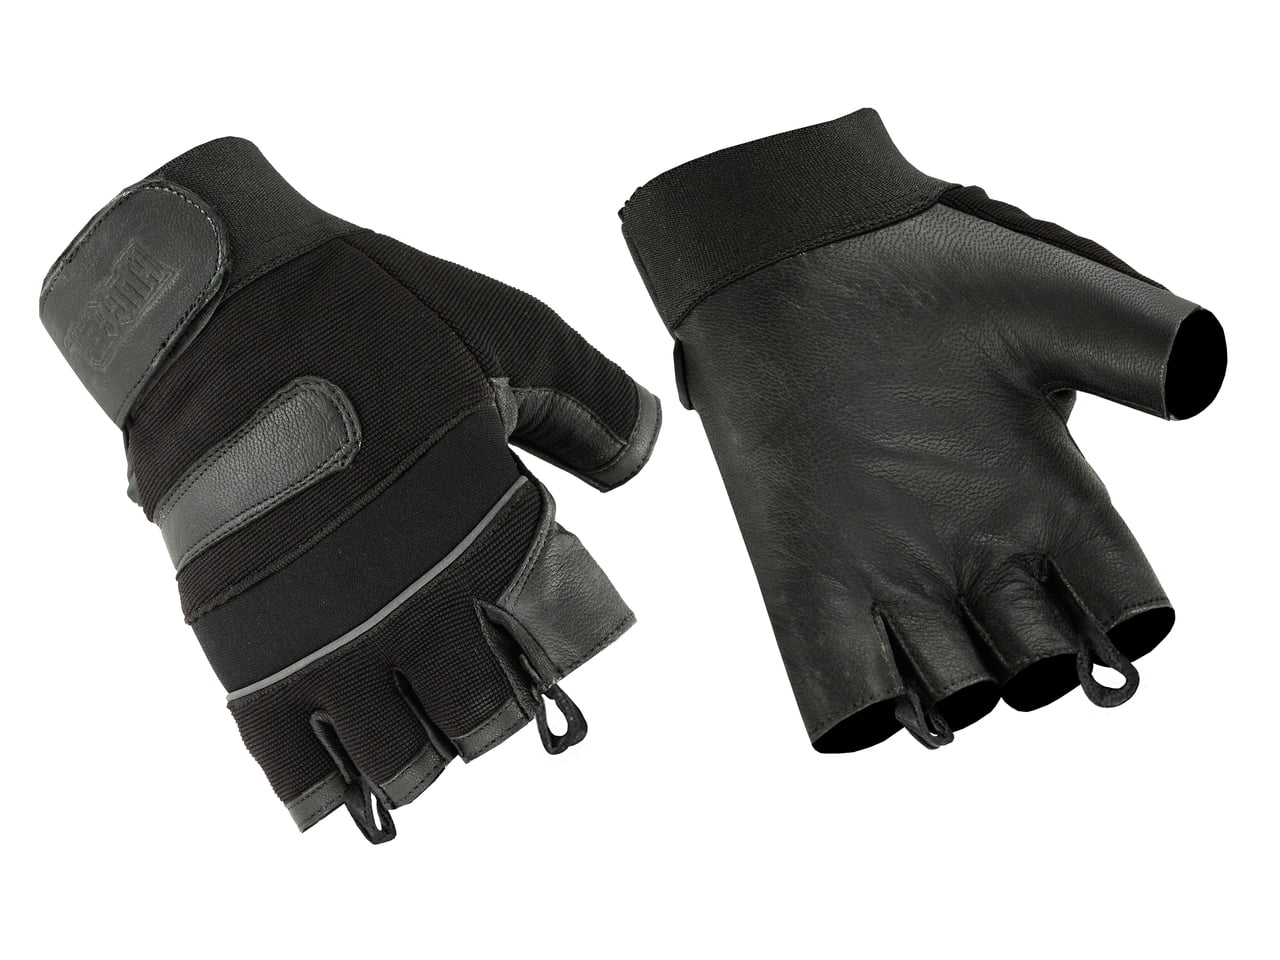 Men's Comfort Zone Fingerless Glove with Reflective Piping on Handback